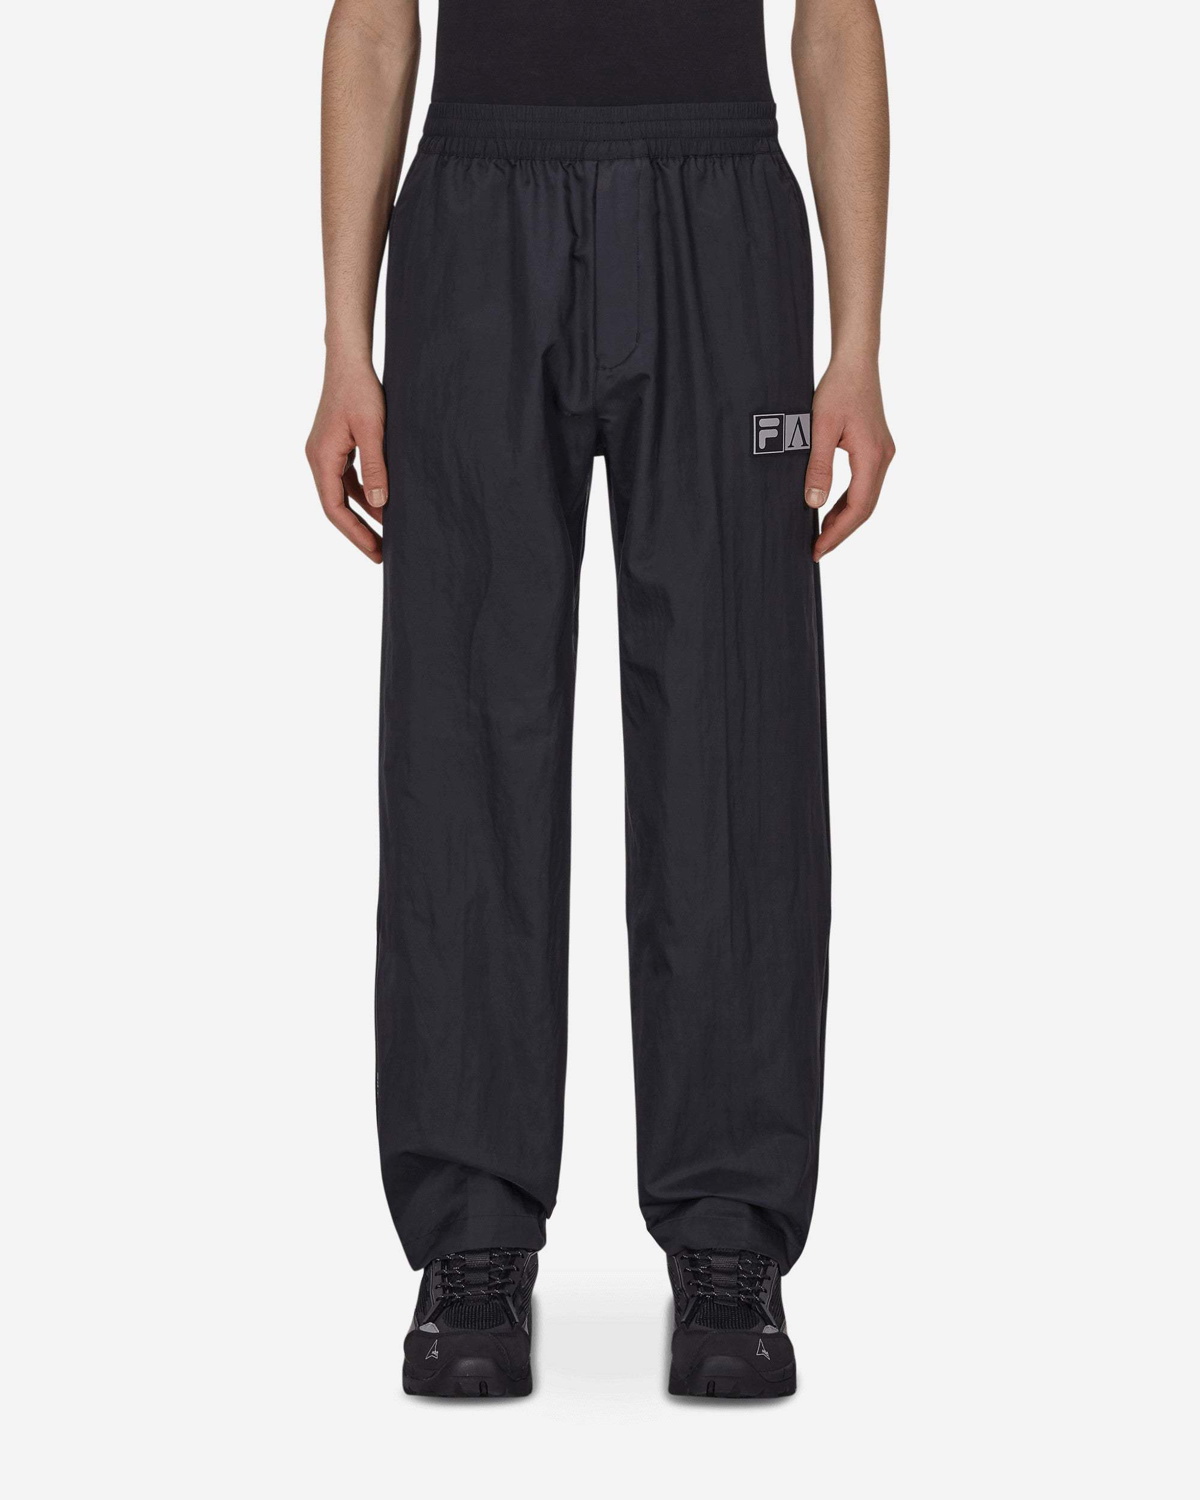 Fila Uo Exclusive Mtn Wilson Black Cargo Trousers - Black S At Urban  Outfitters from Urban Outfitters on 21 Buttons